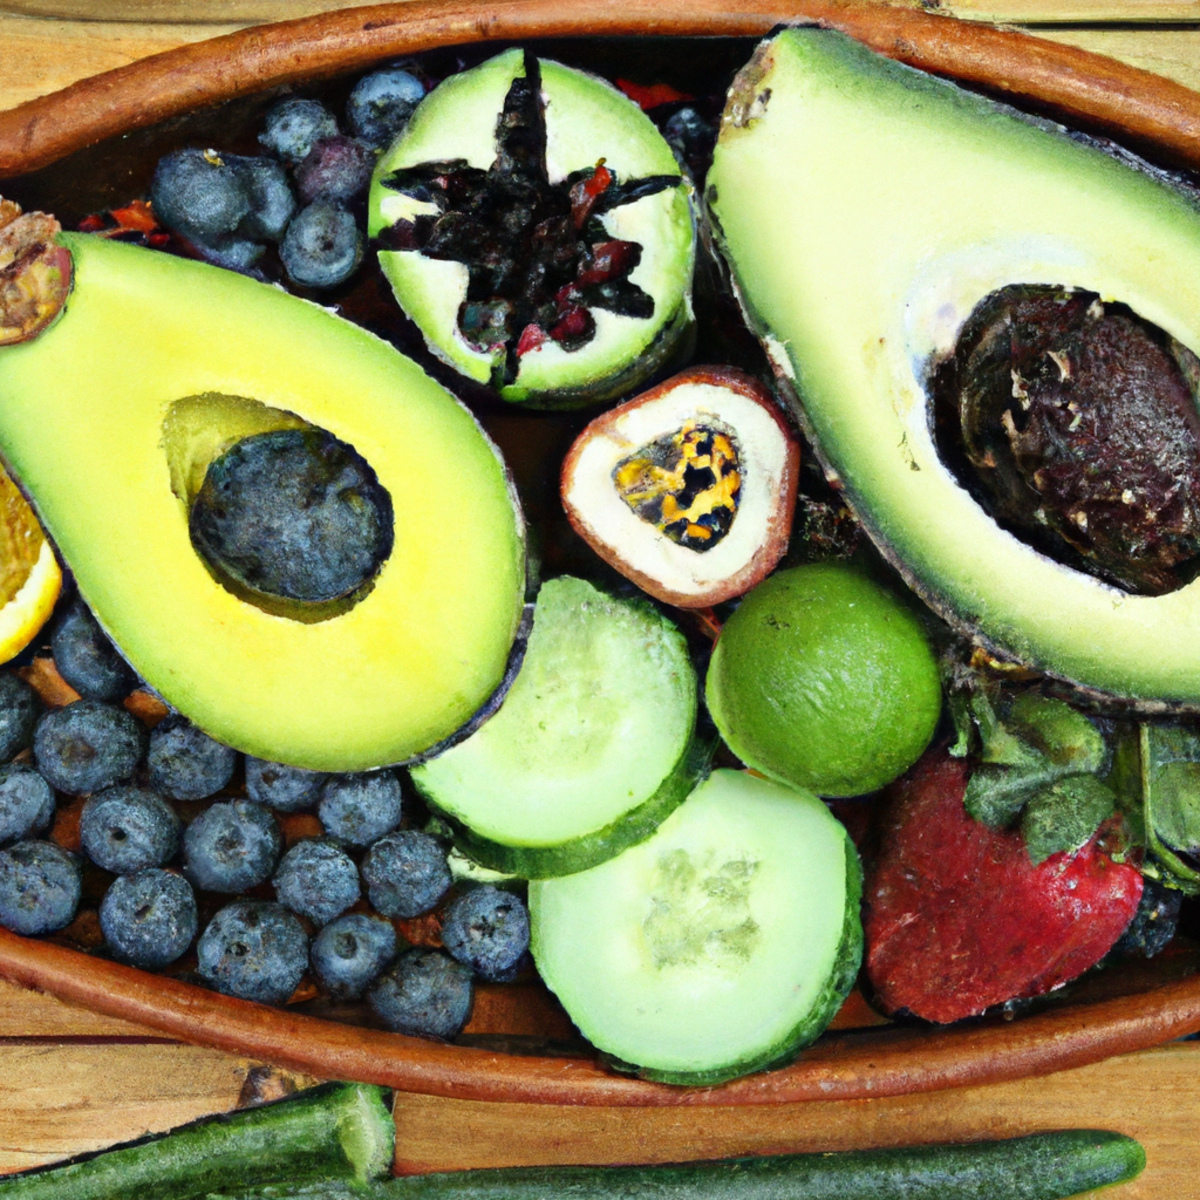 Get ready to avocado glow with these natural skin care routines! From blueberries to mint, honey to coconut oil, this wooden tray is a feast for your face. Say goodbye to harsh chemicals and hello to a holistic approach to healthy, radiant skin.